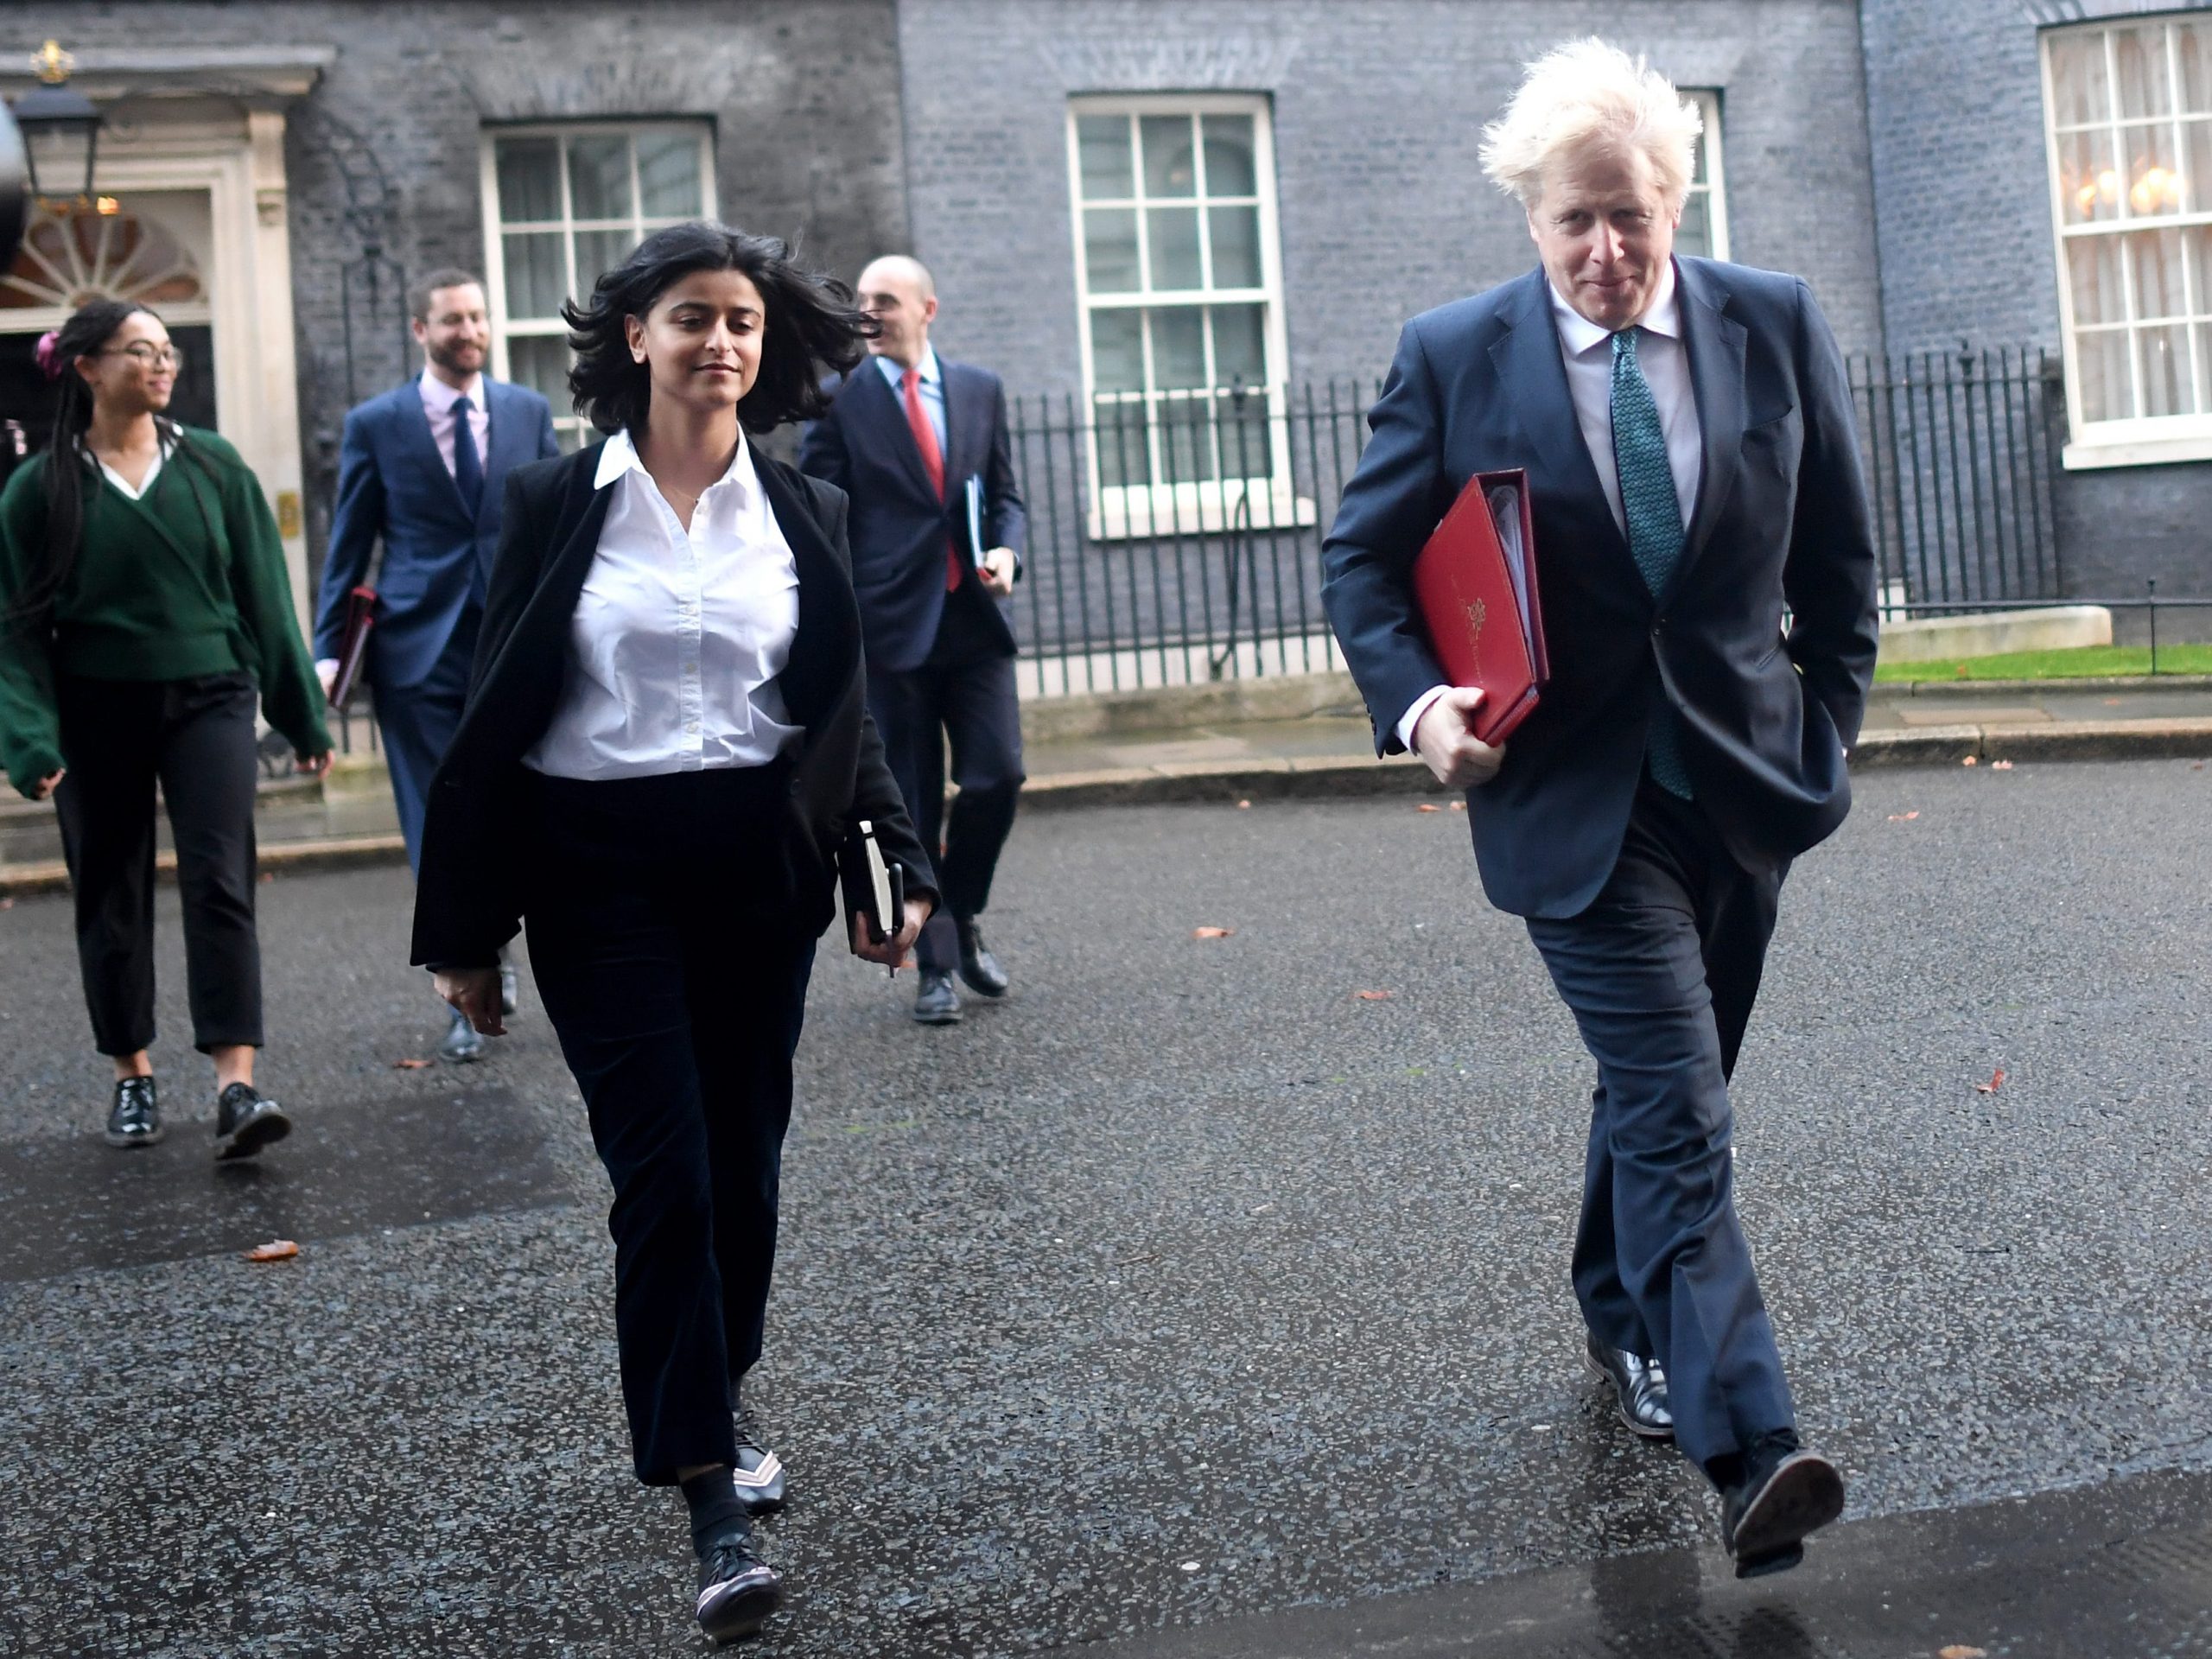 Prime Minister Boris Johnson leaves Downing Street for a Cabinet Meeting at the FCO with political advisor Munira Mirza (L), on December 15, 2020 in London, England.